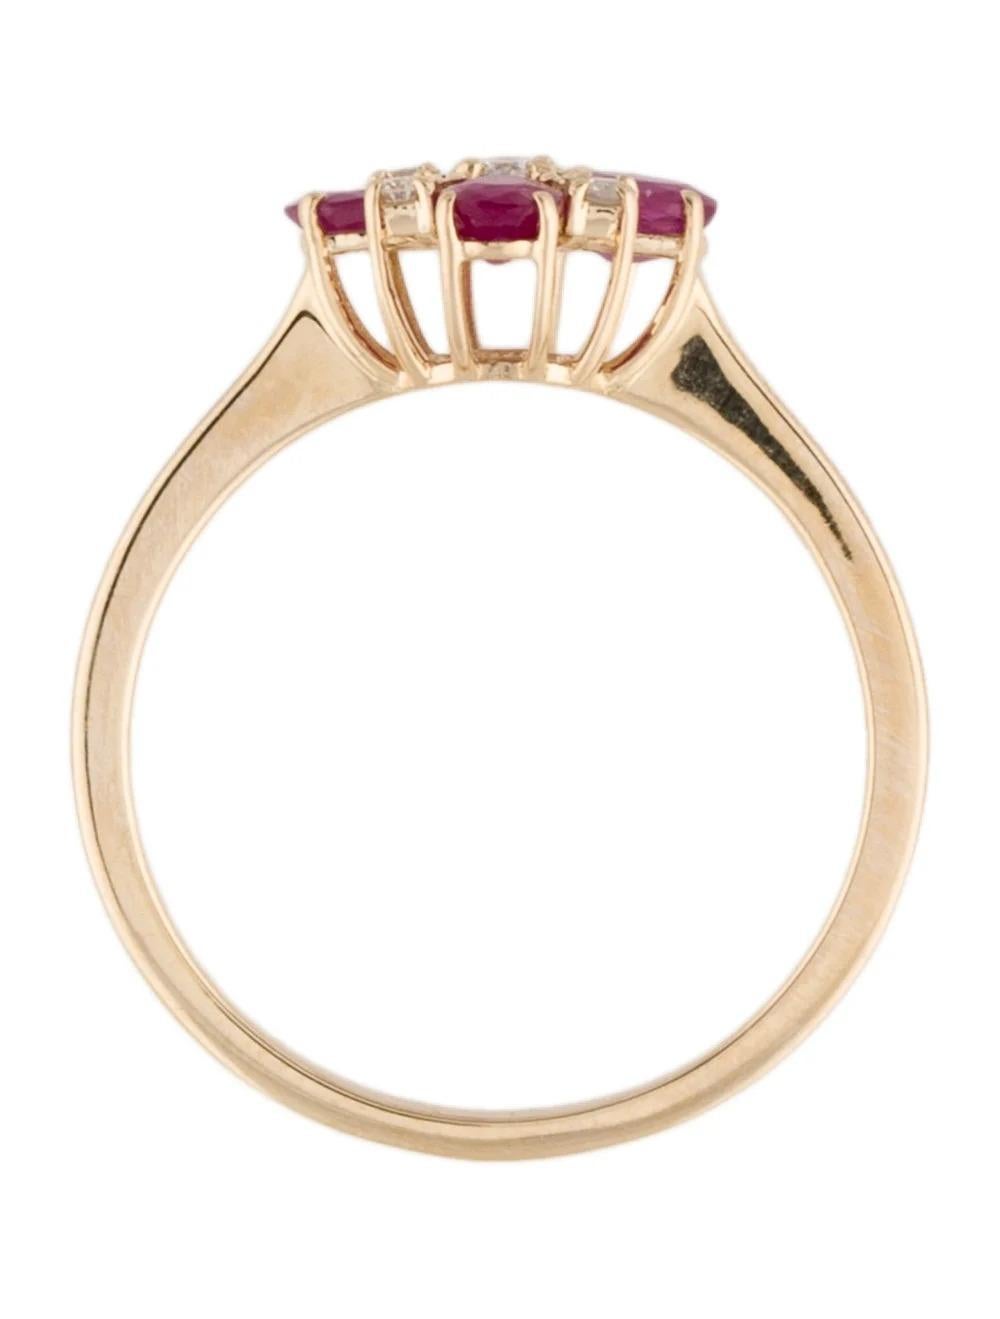 Women's 14K Ruby & Diamond Cocktail Ring, Size 6.75 - Stunning Design, Statement Jewelry For Sale